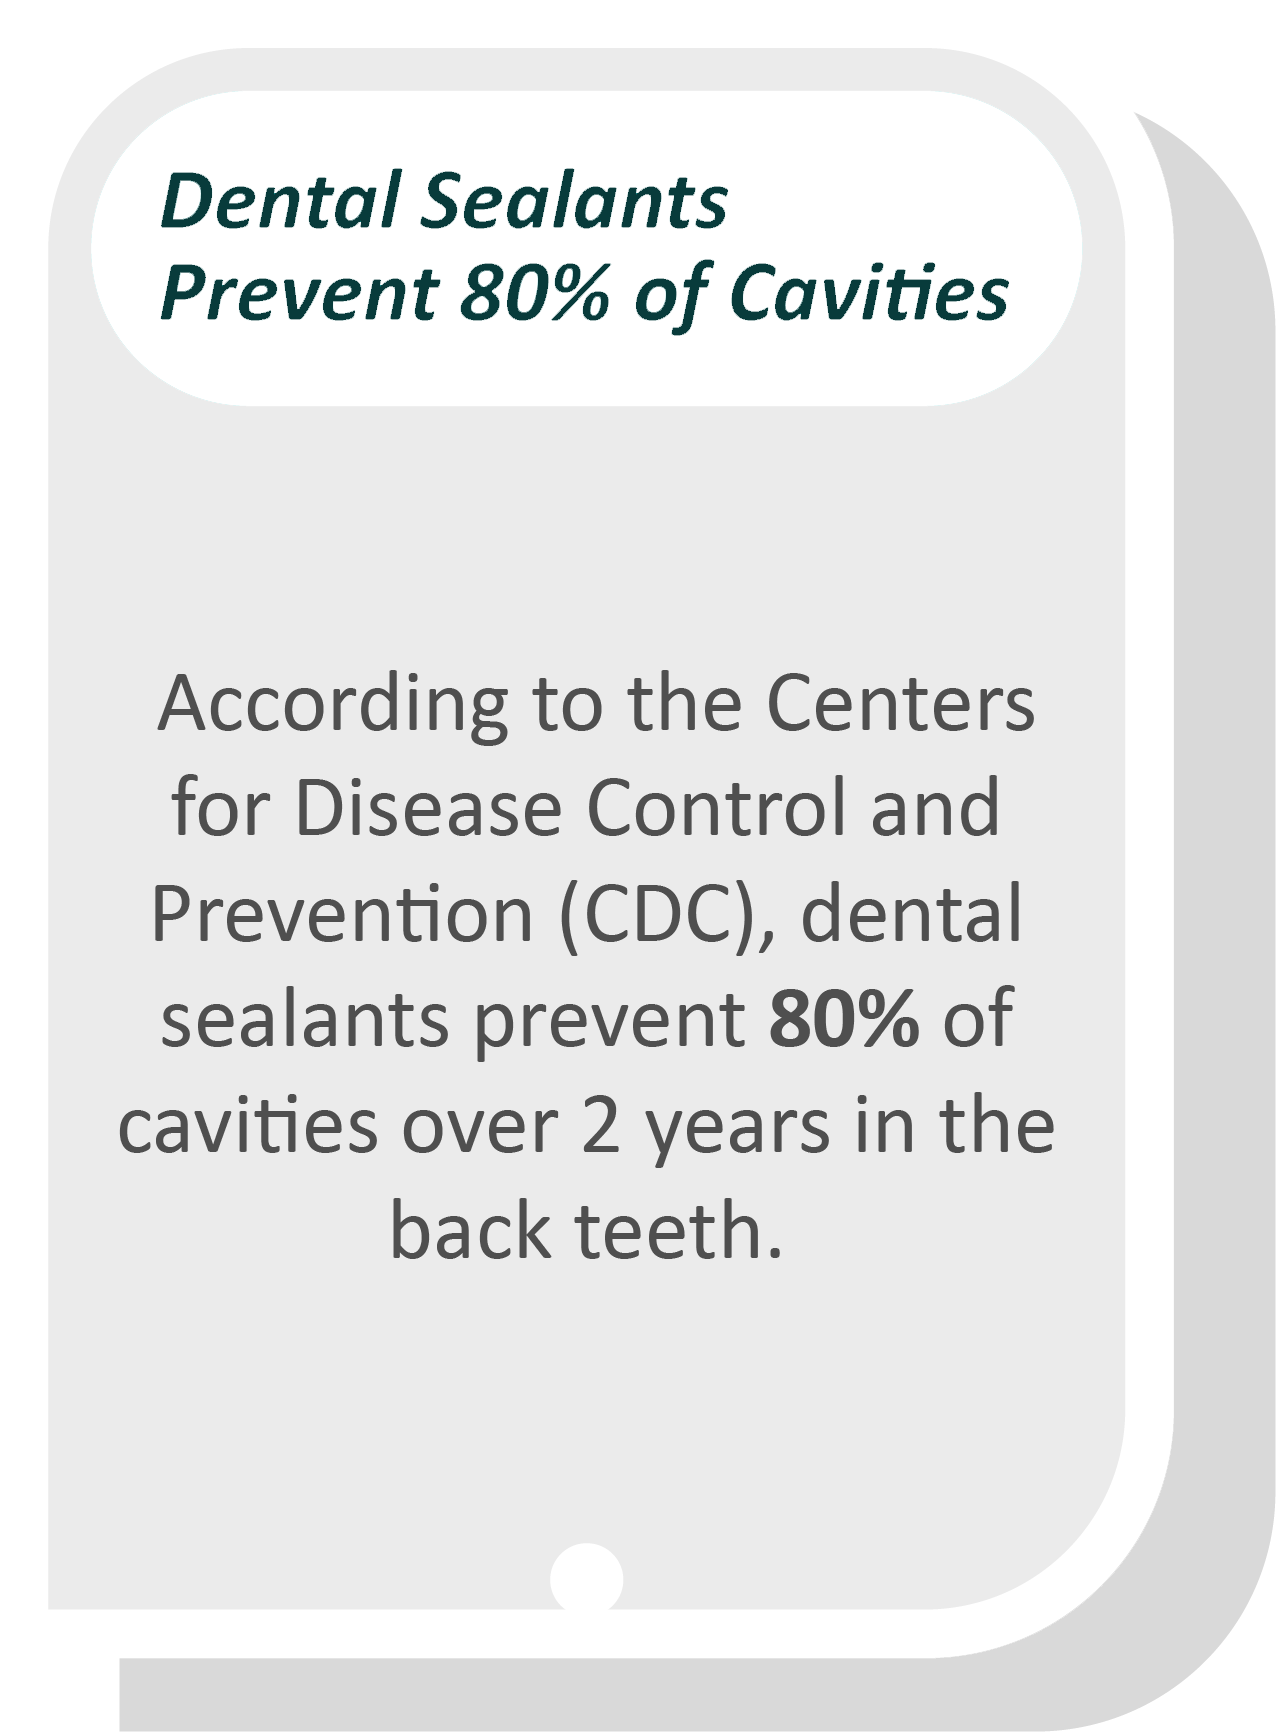 Dental sealants infographic: According to the Centers for Disease Control and Prevention (CDC), dental sealants prevent 80% of cavities over 2 years in the back teeth.